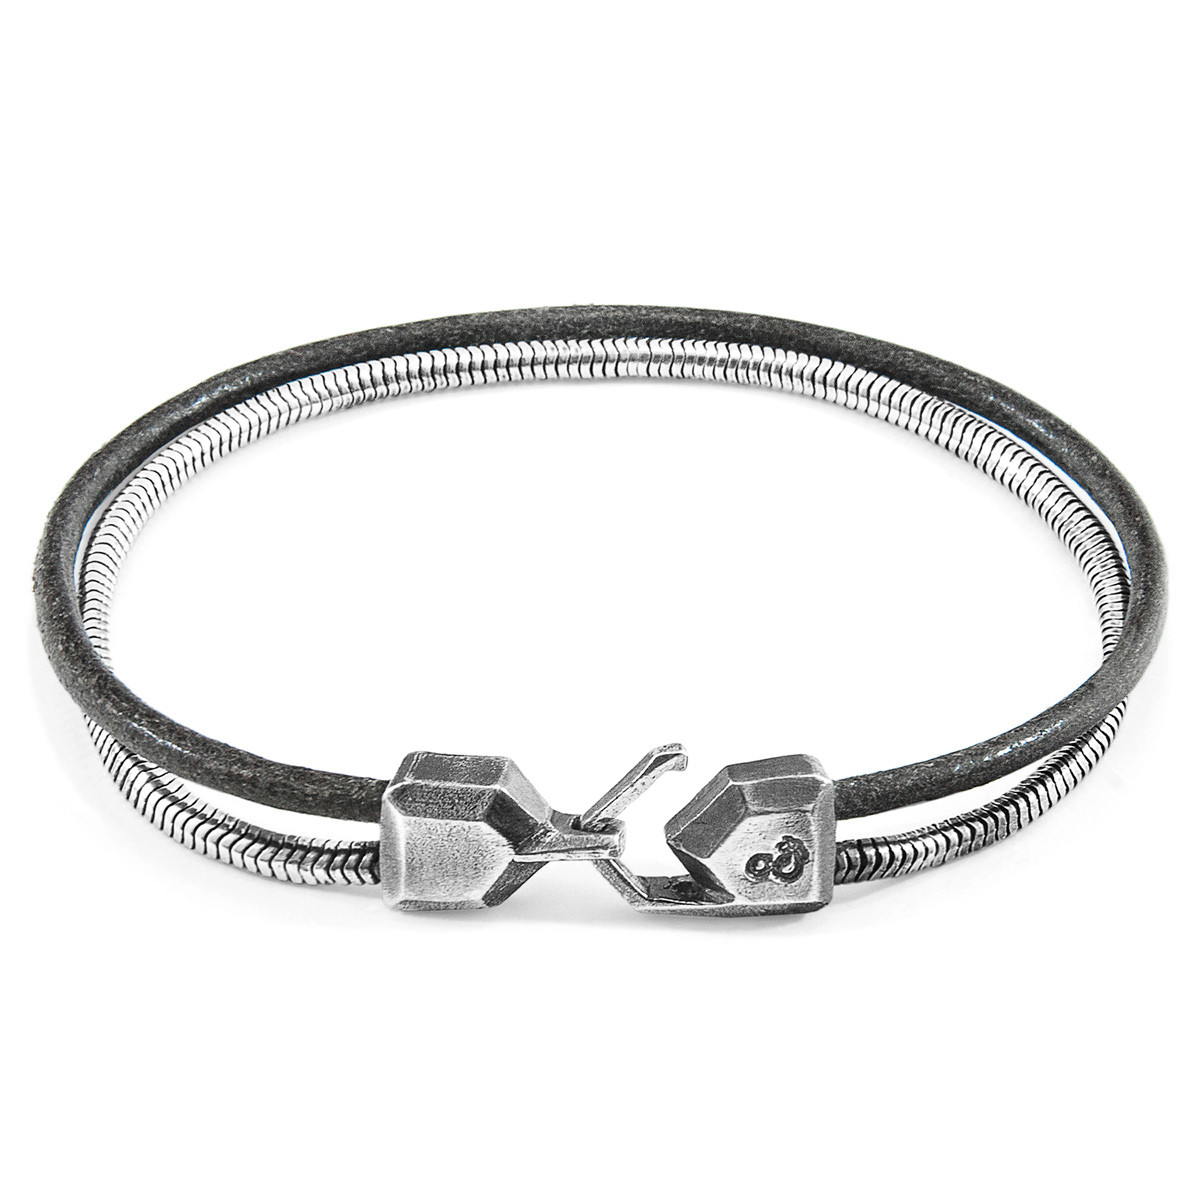 Shadow Grey Gallant Mast Silver and Round Leather Bracelet